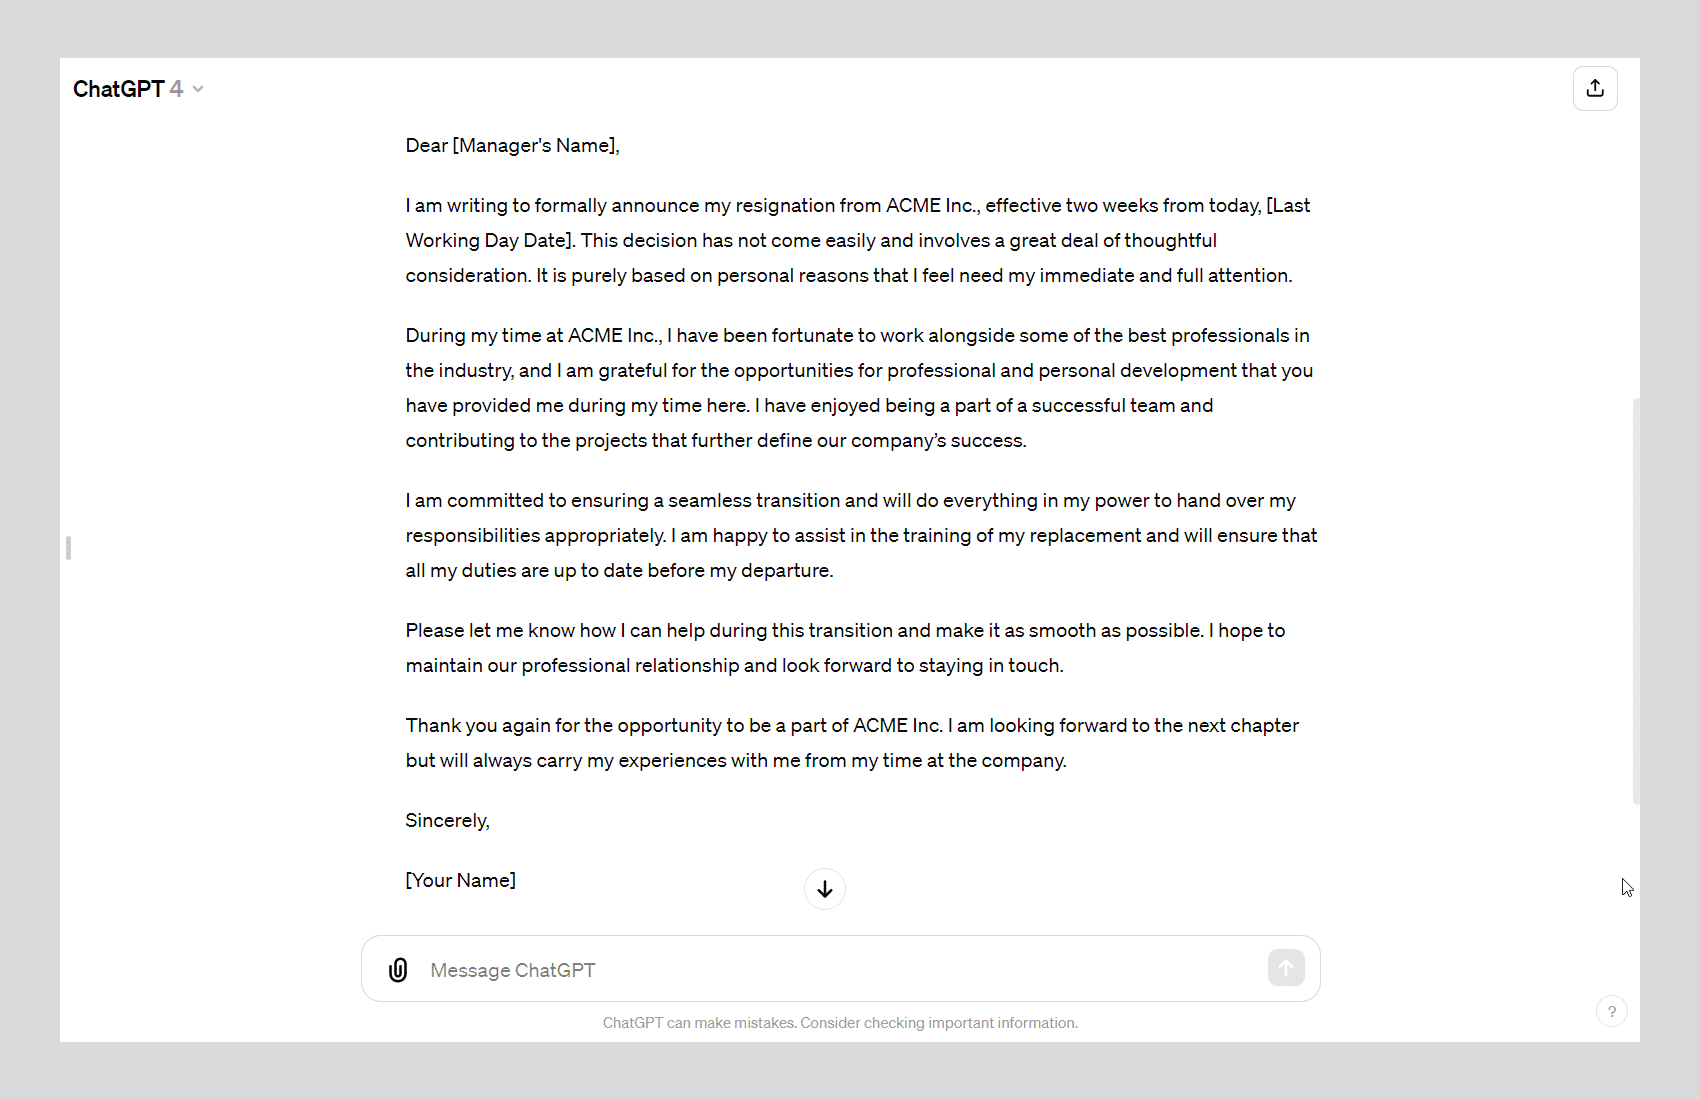 Preparing a Two Weeks Notice Letter with ChatGPT with text generated by AI